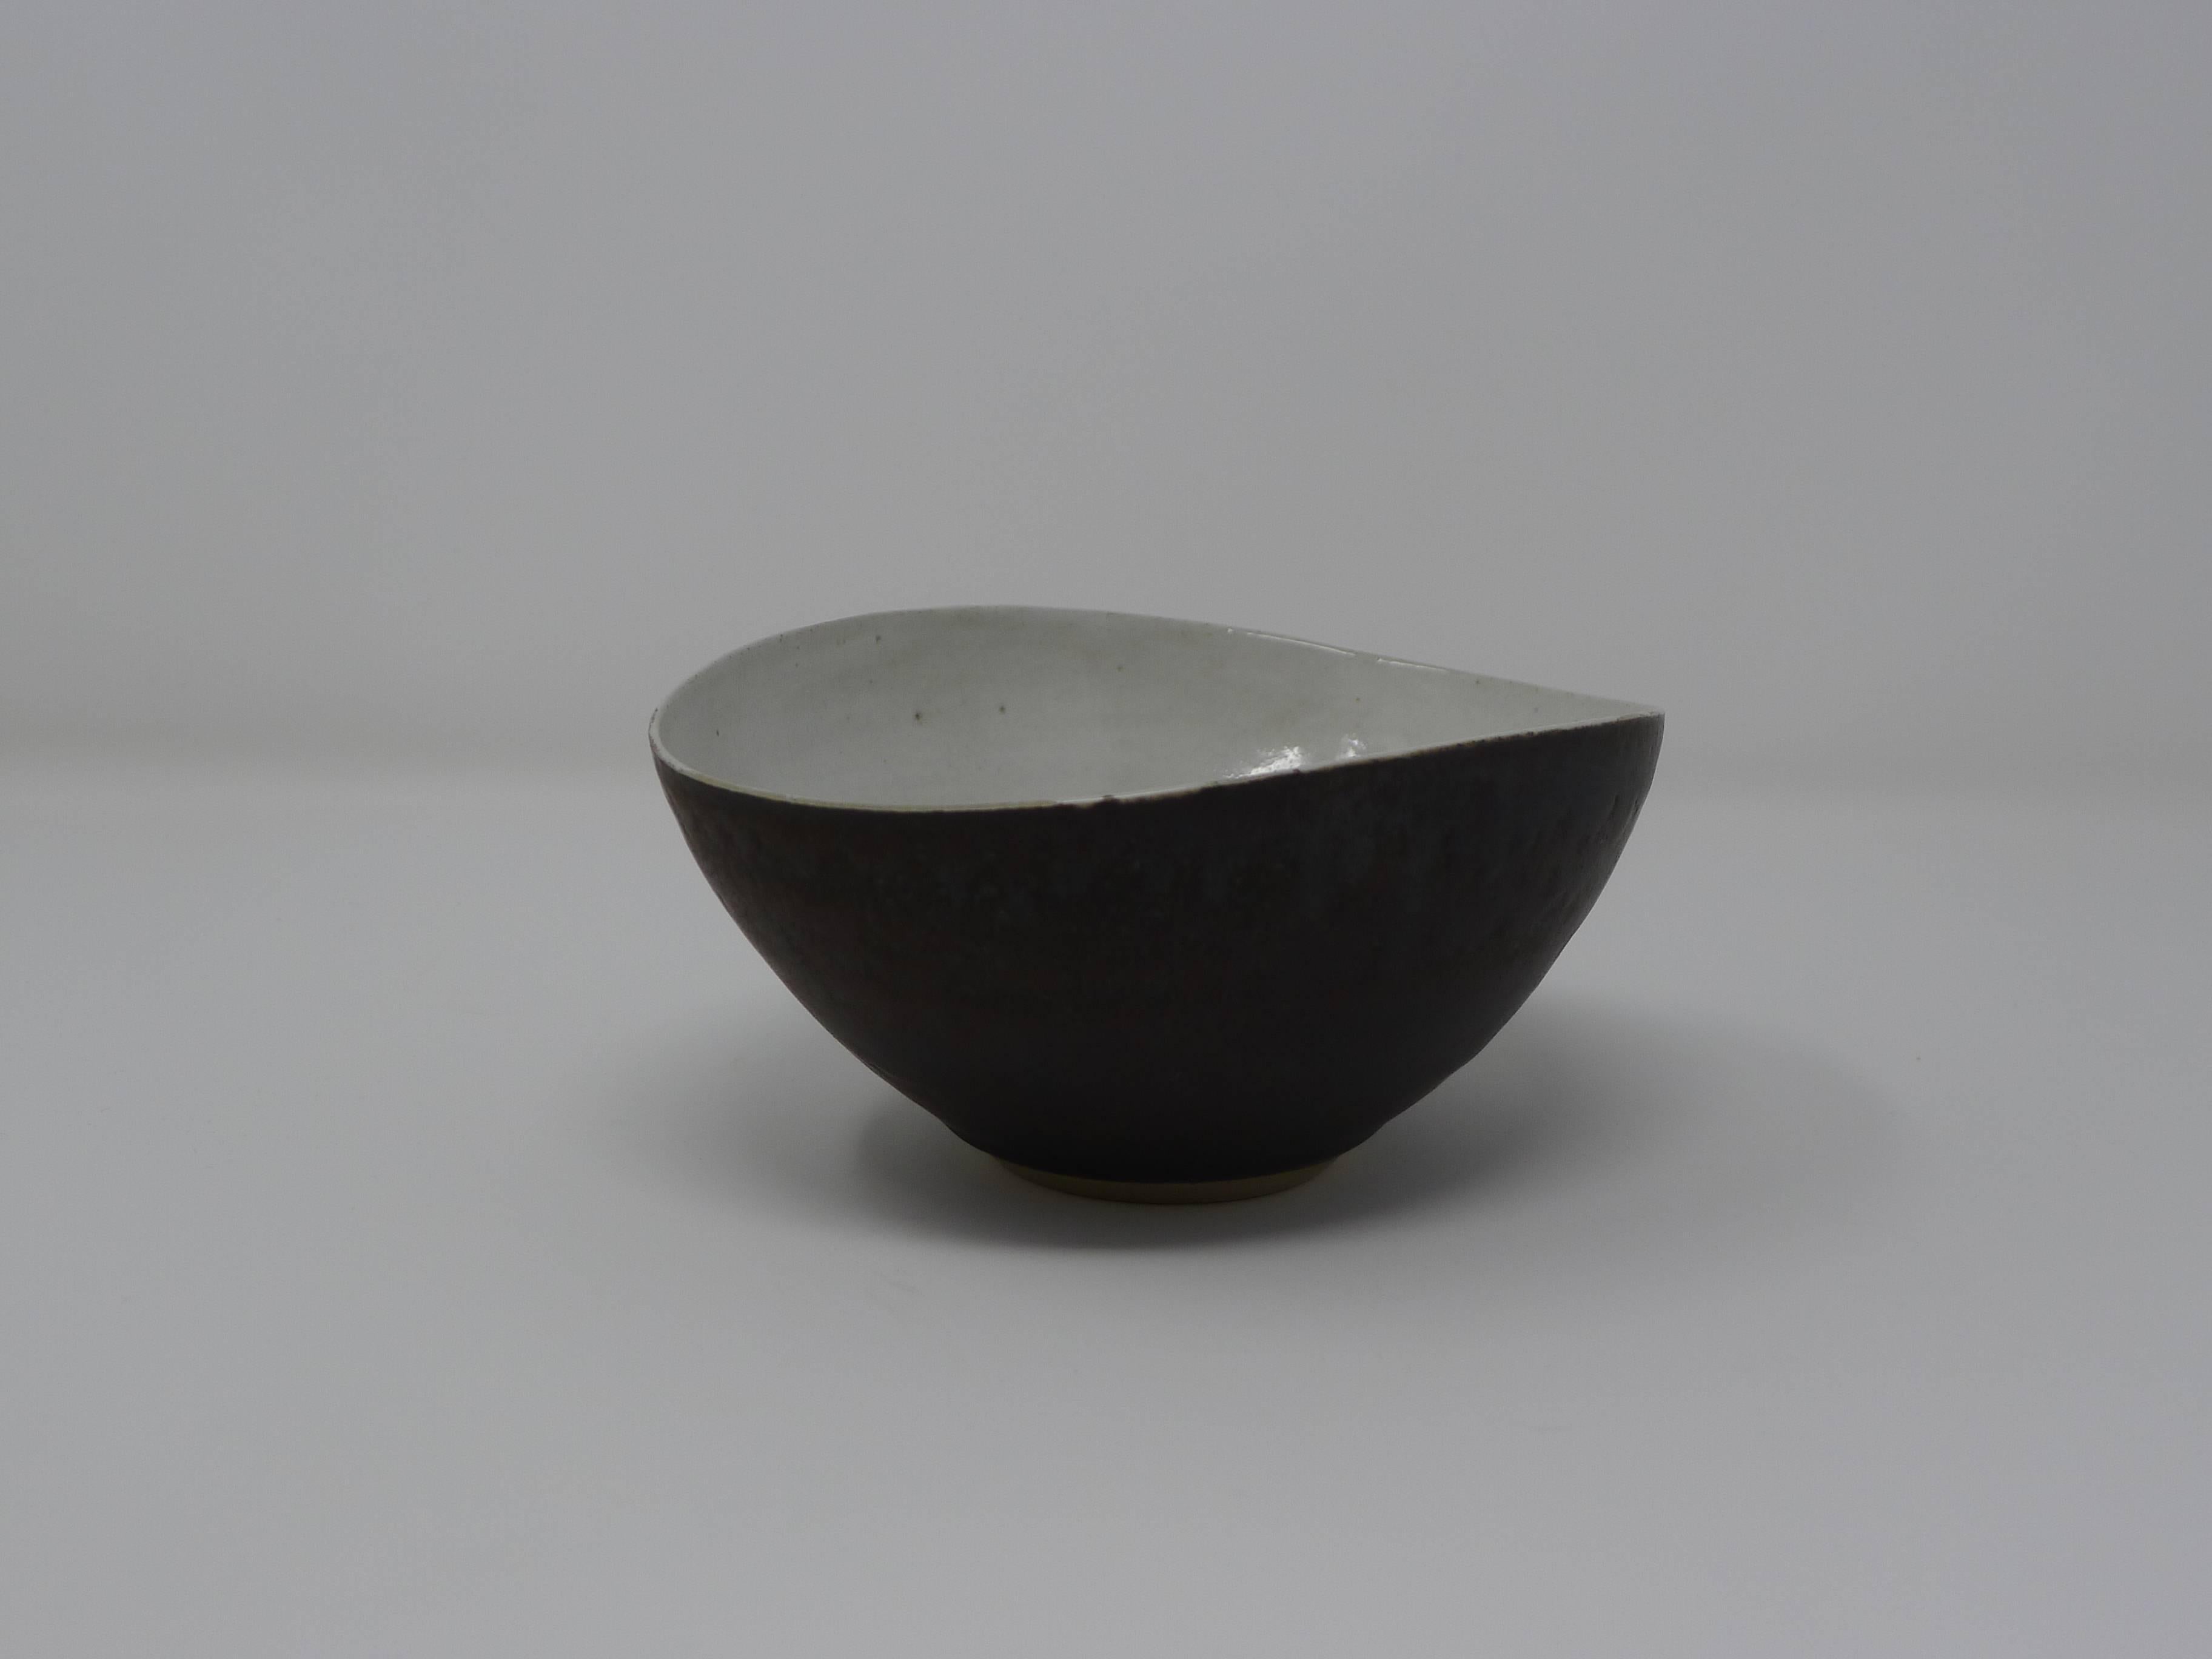 Dame Lucie Rie, Austria / UK. A stoneware bowl with white interior and manganese exterior, manufactured in the 1970s. The piece is signed to the underside as shown. 

Perfect condition.